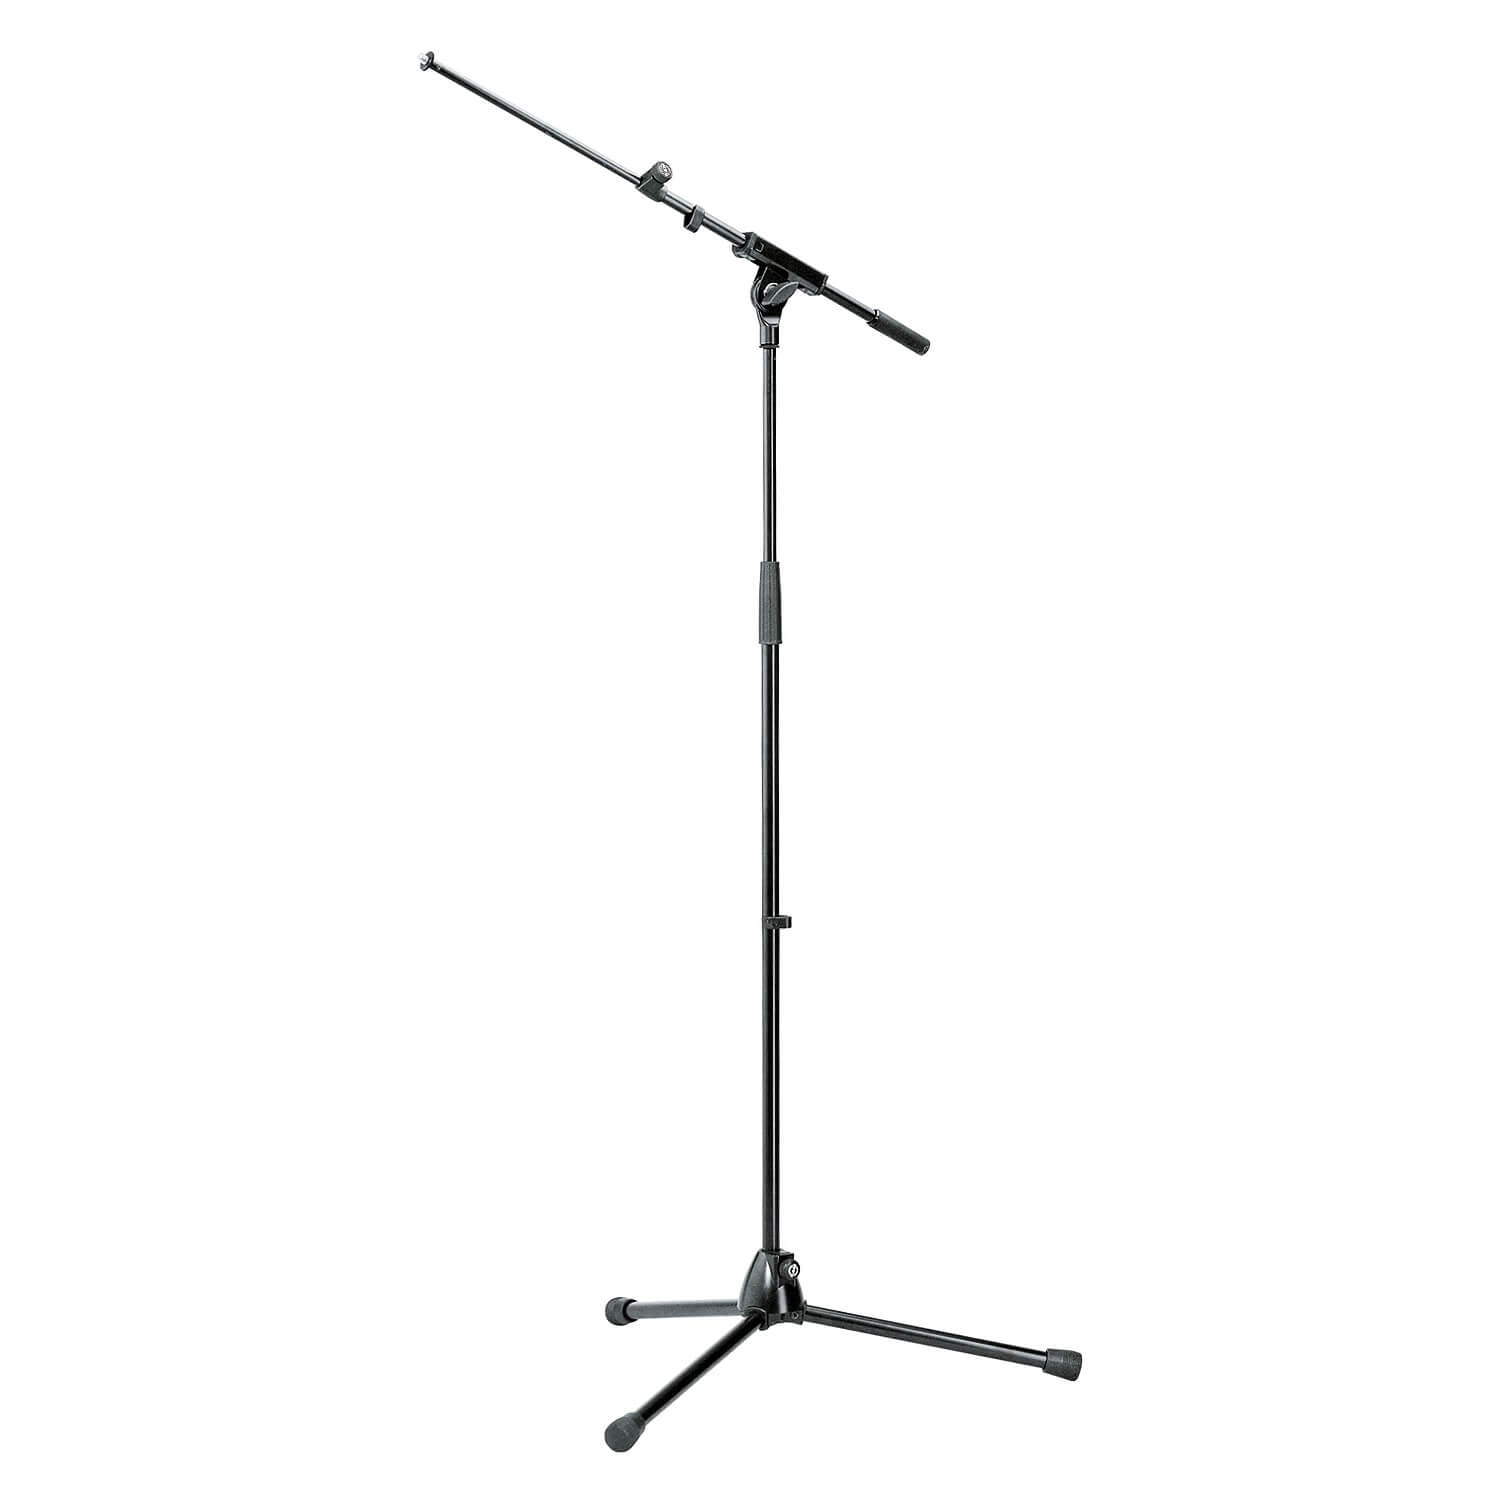 Konig & Meyer 210/8 - Microphone Stand with Telescoping Boom Arm